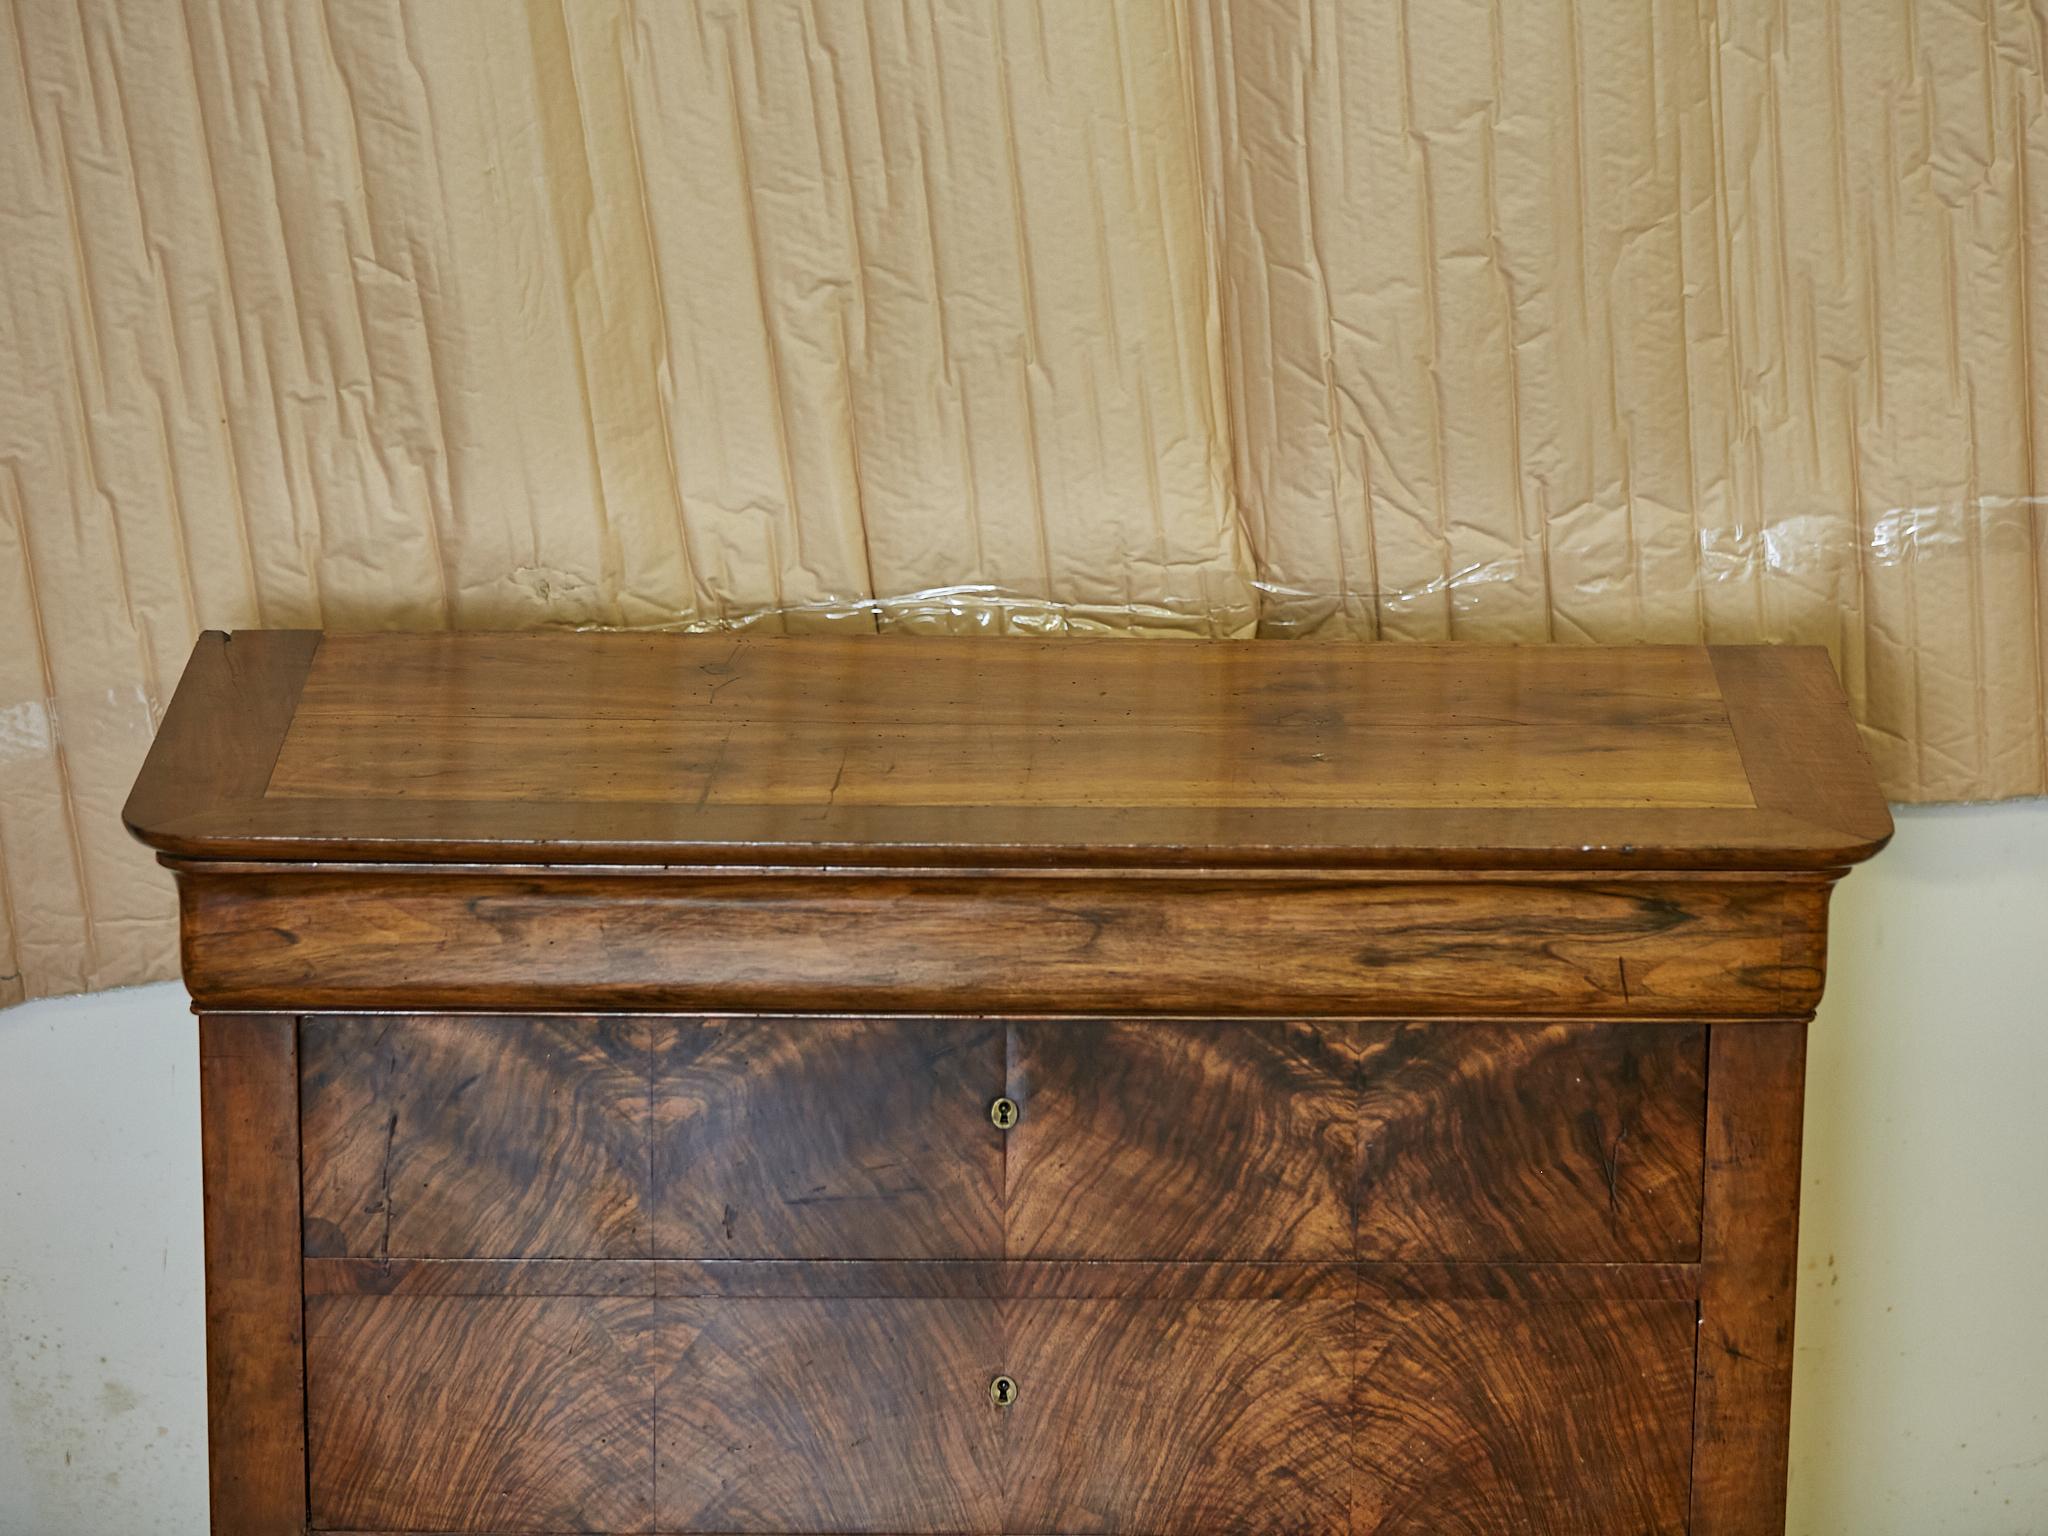 Louis-Philippe French 19th Century Bookmatched Walnut Chest with Four Drawers For Sale 4